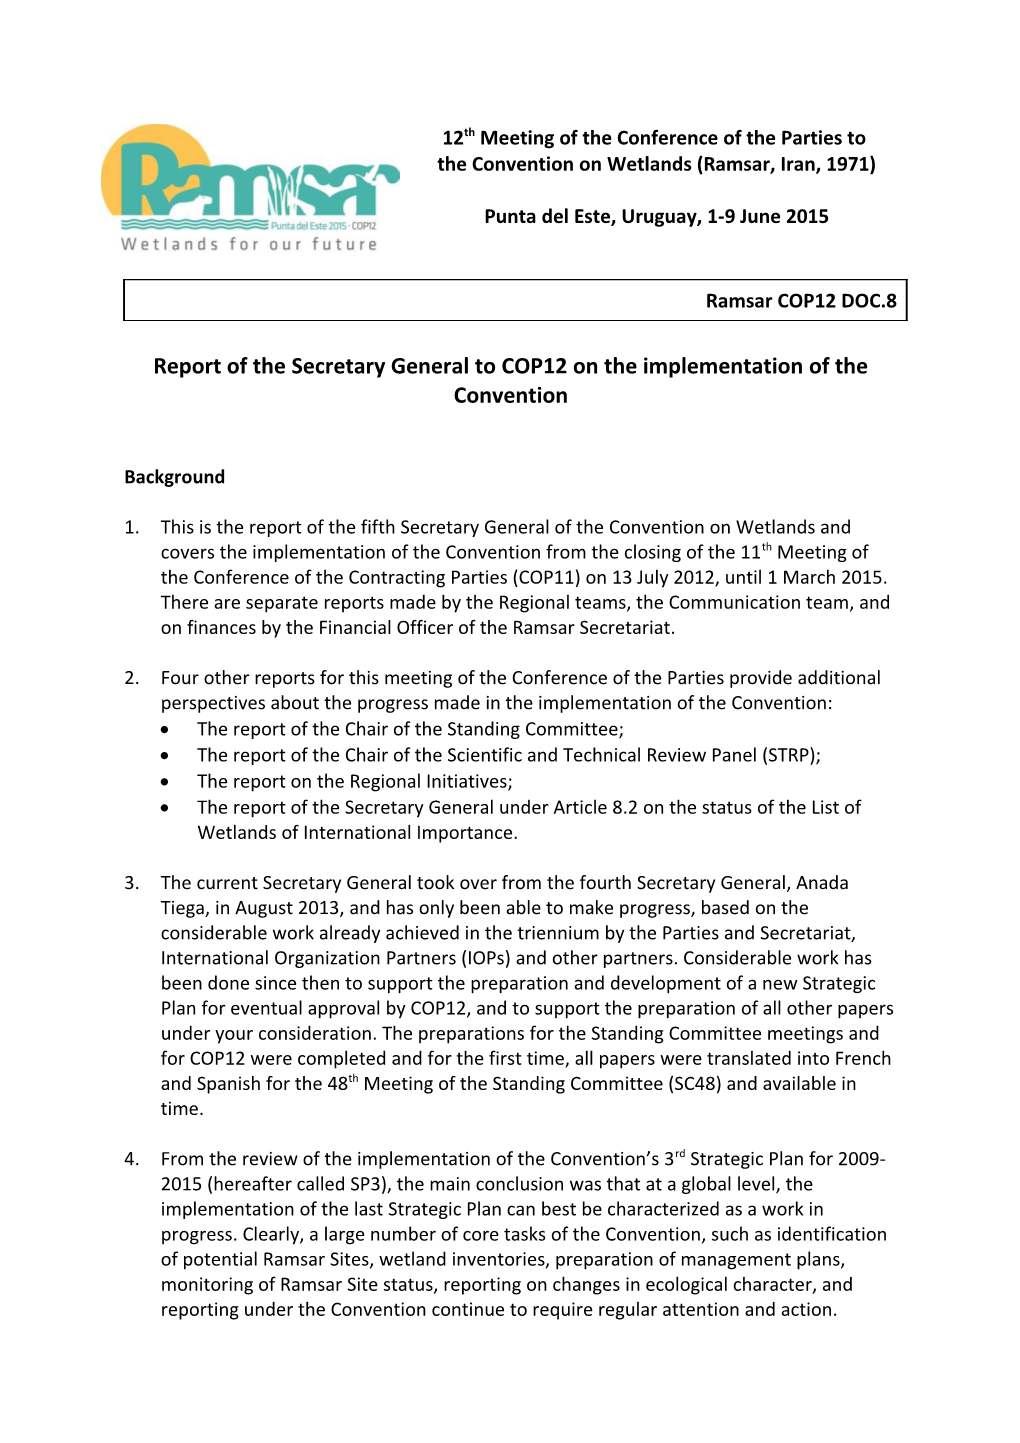 Report of the Secretary General to COP12 on the Implementation of the Convention